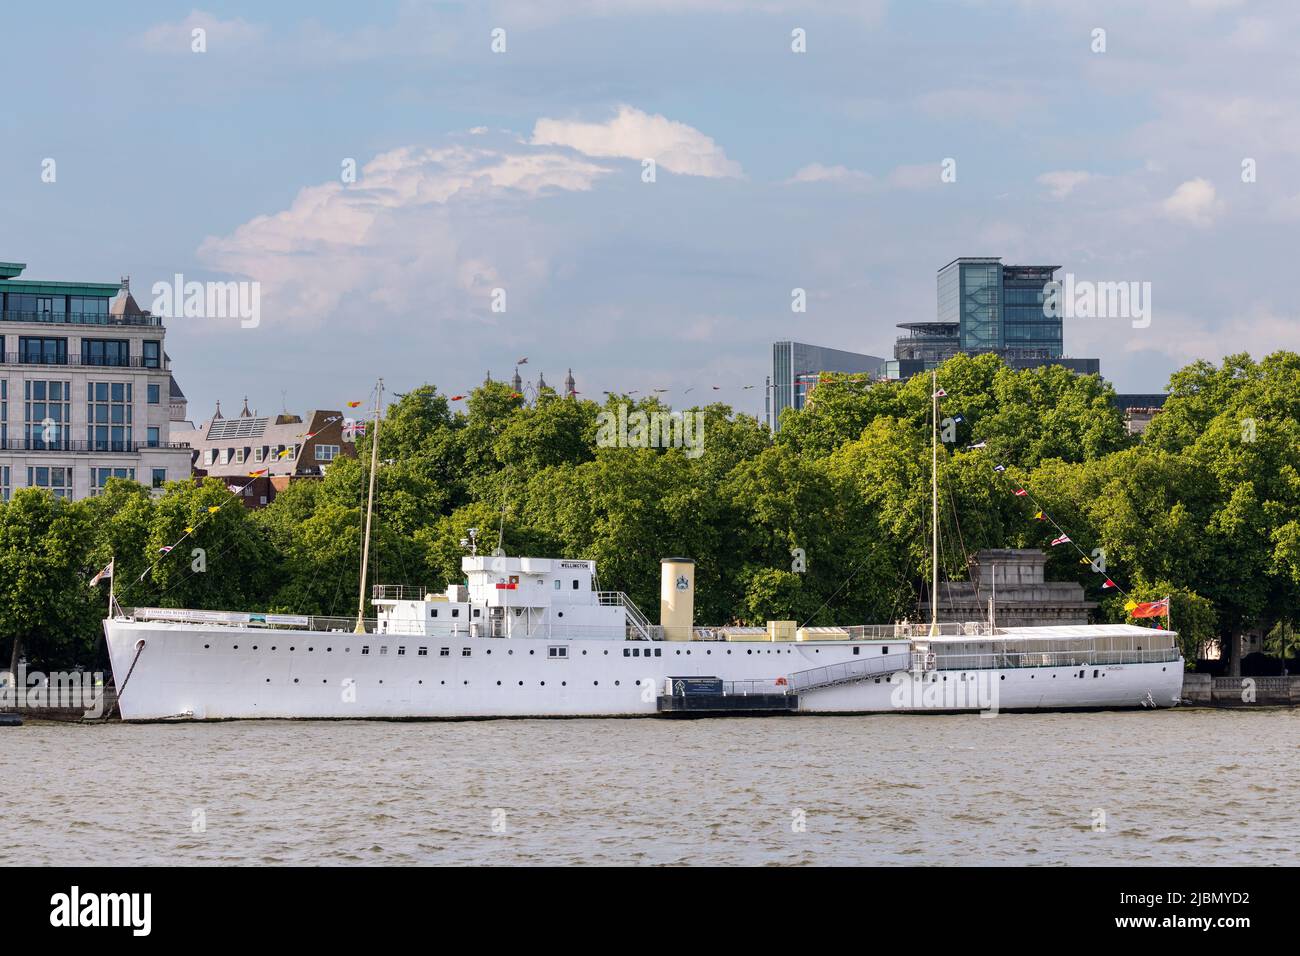 The wellington moored on the river thames Stock Photo